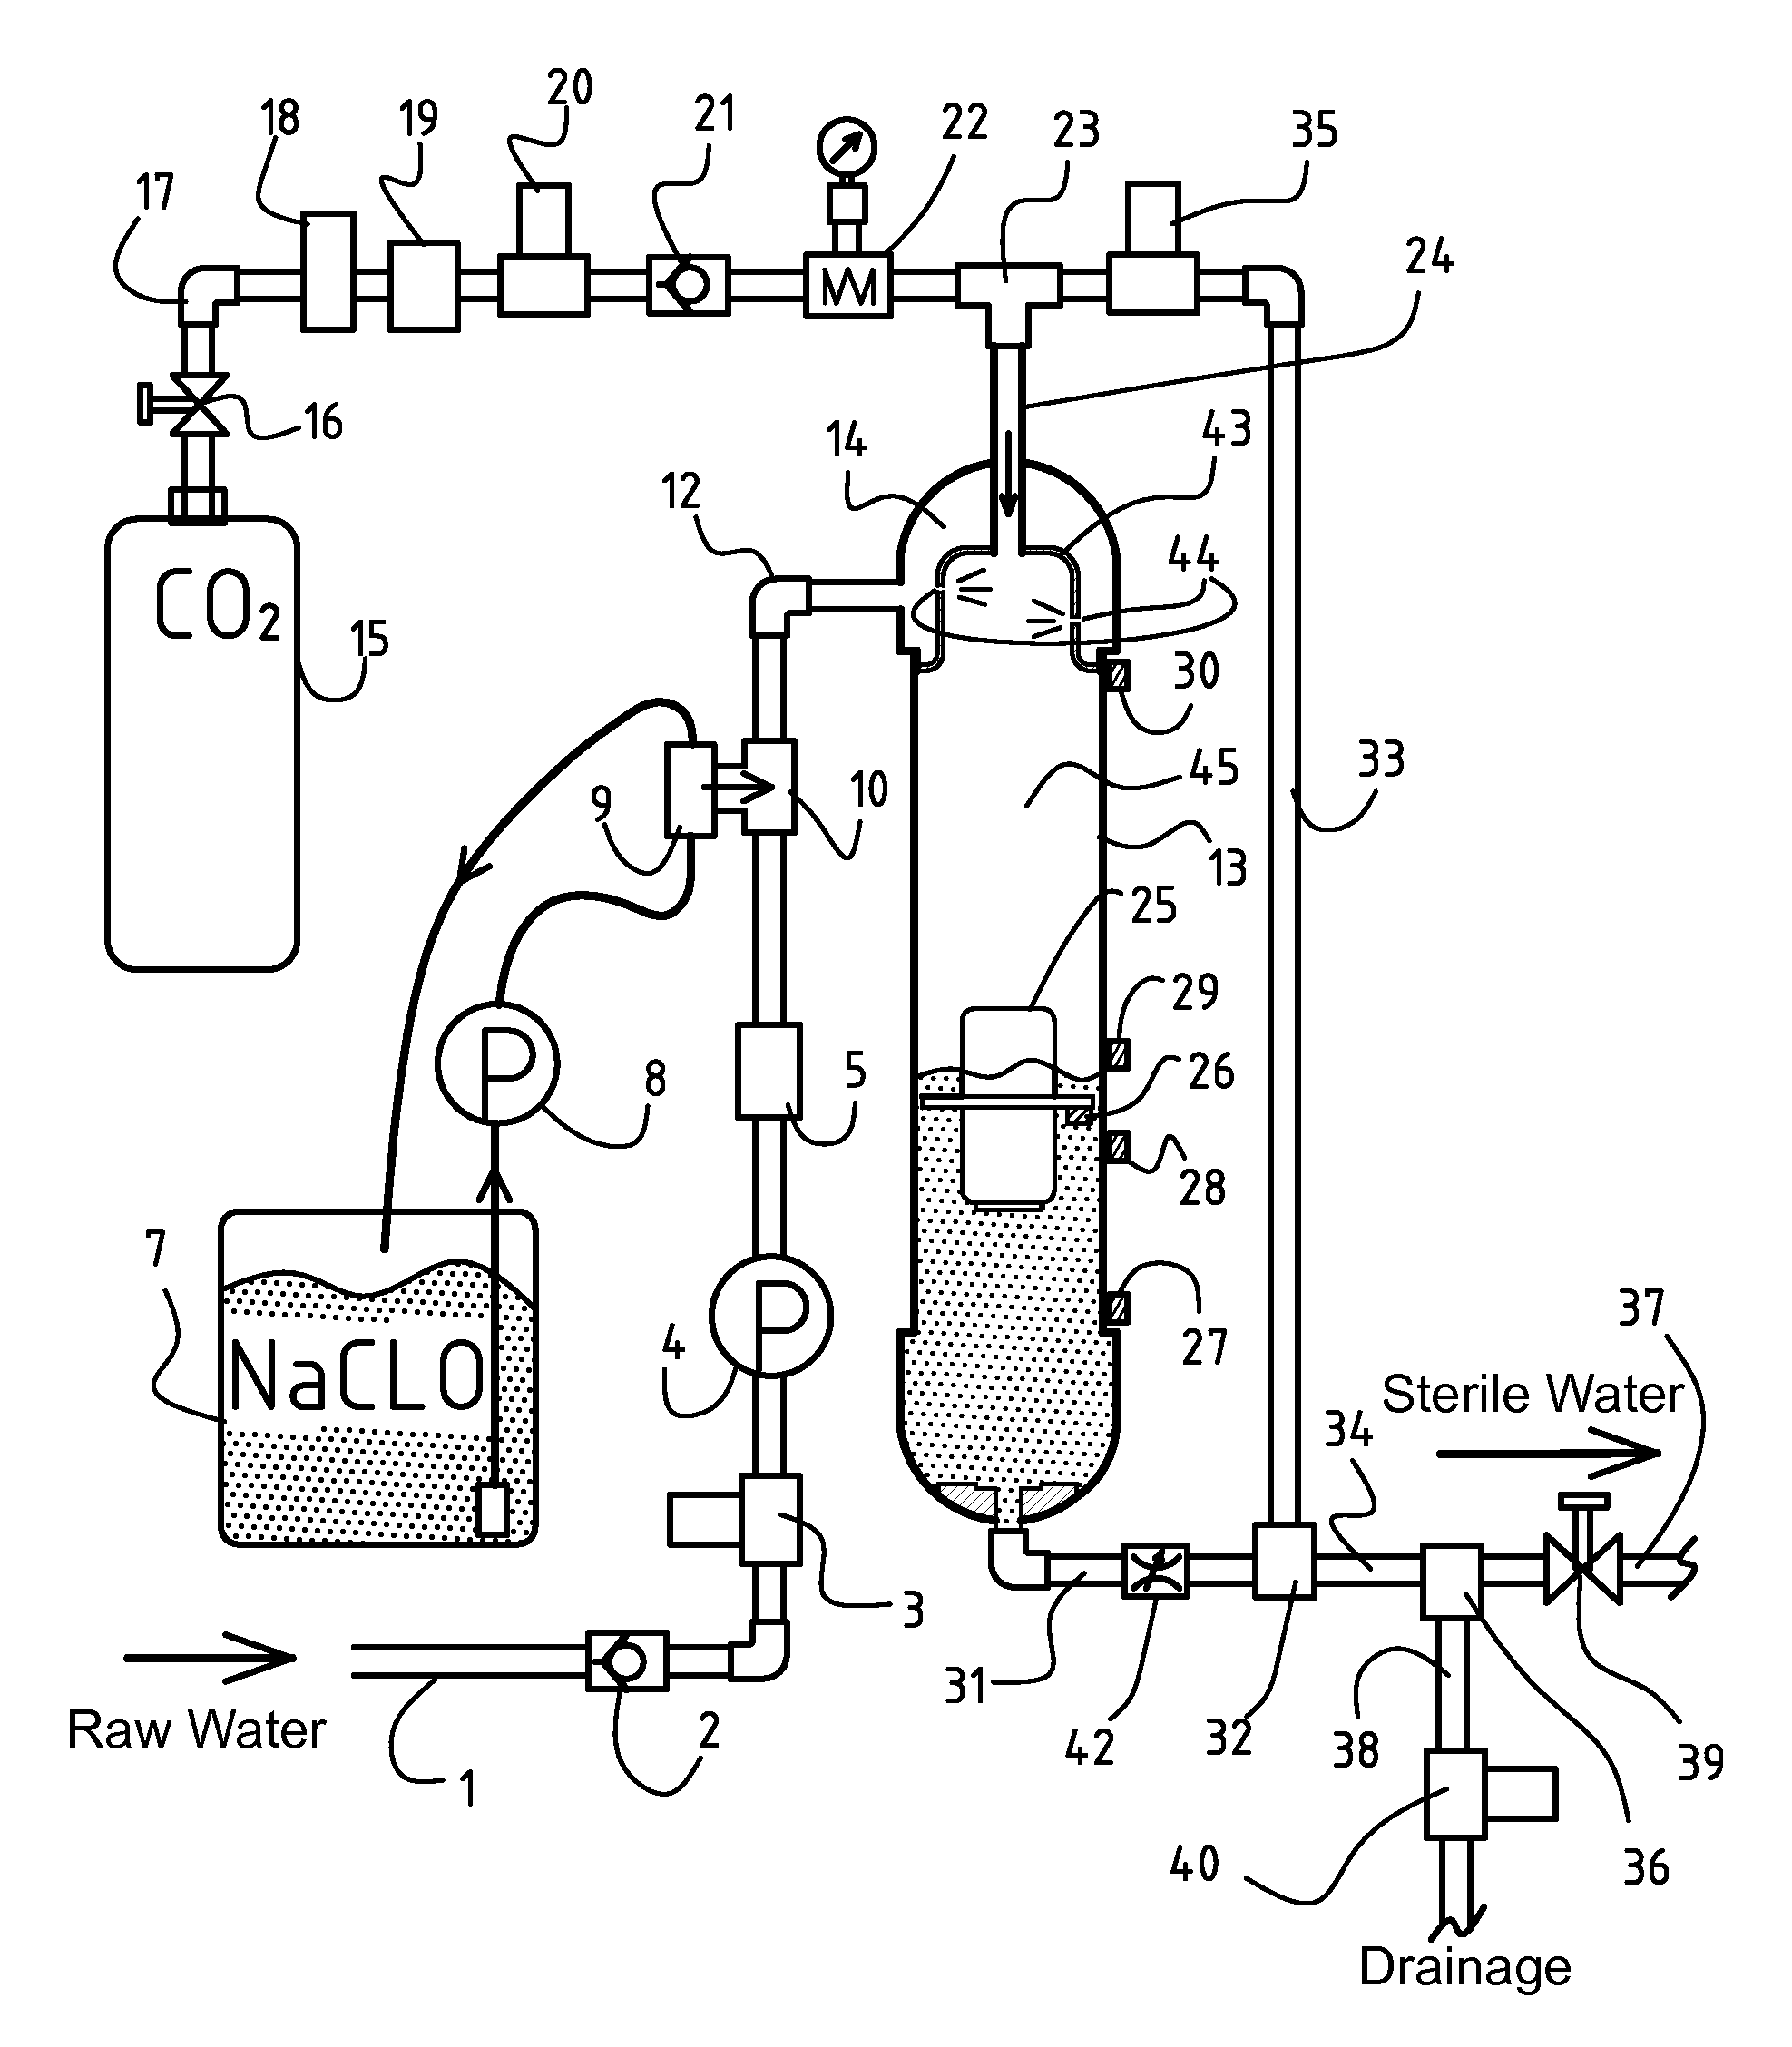 Method and Apparatus For Producing Sterile Water Containing Hypochlorus or Chlorous Acid As a Major Component